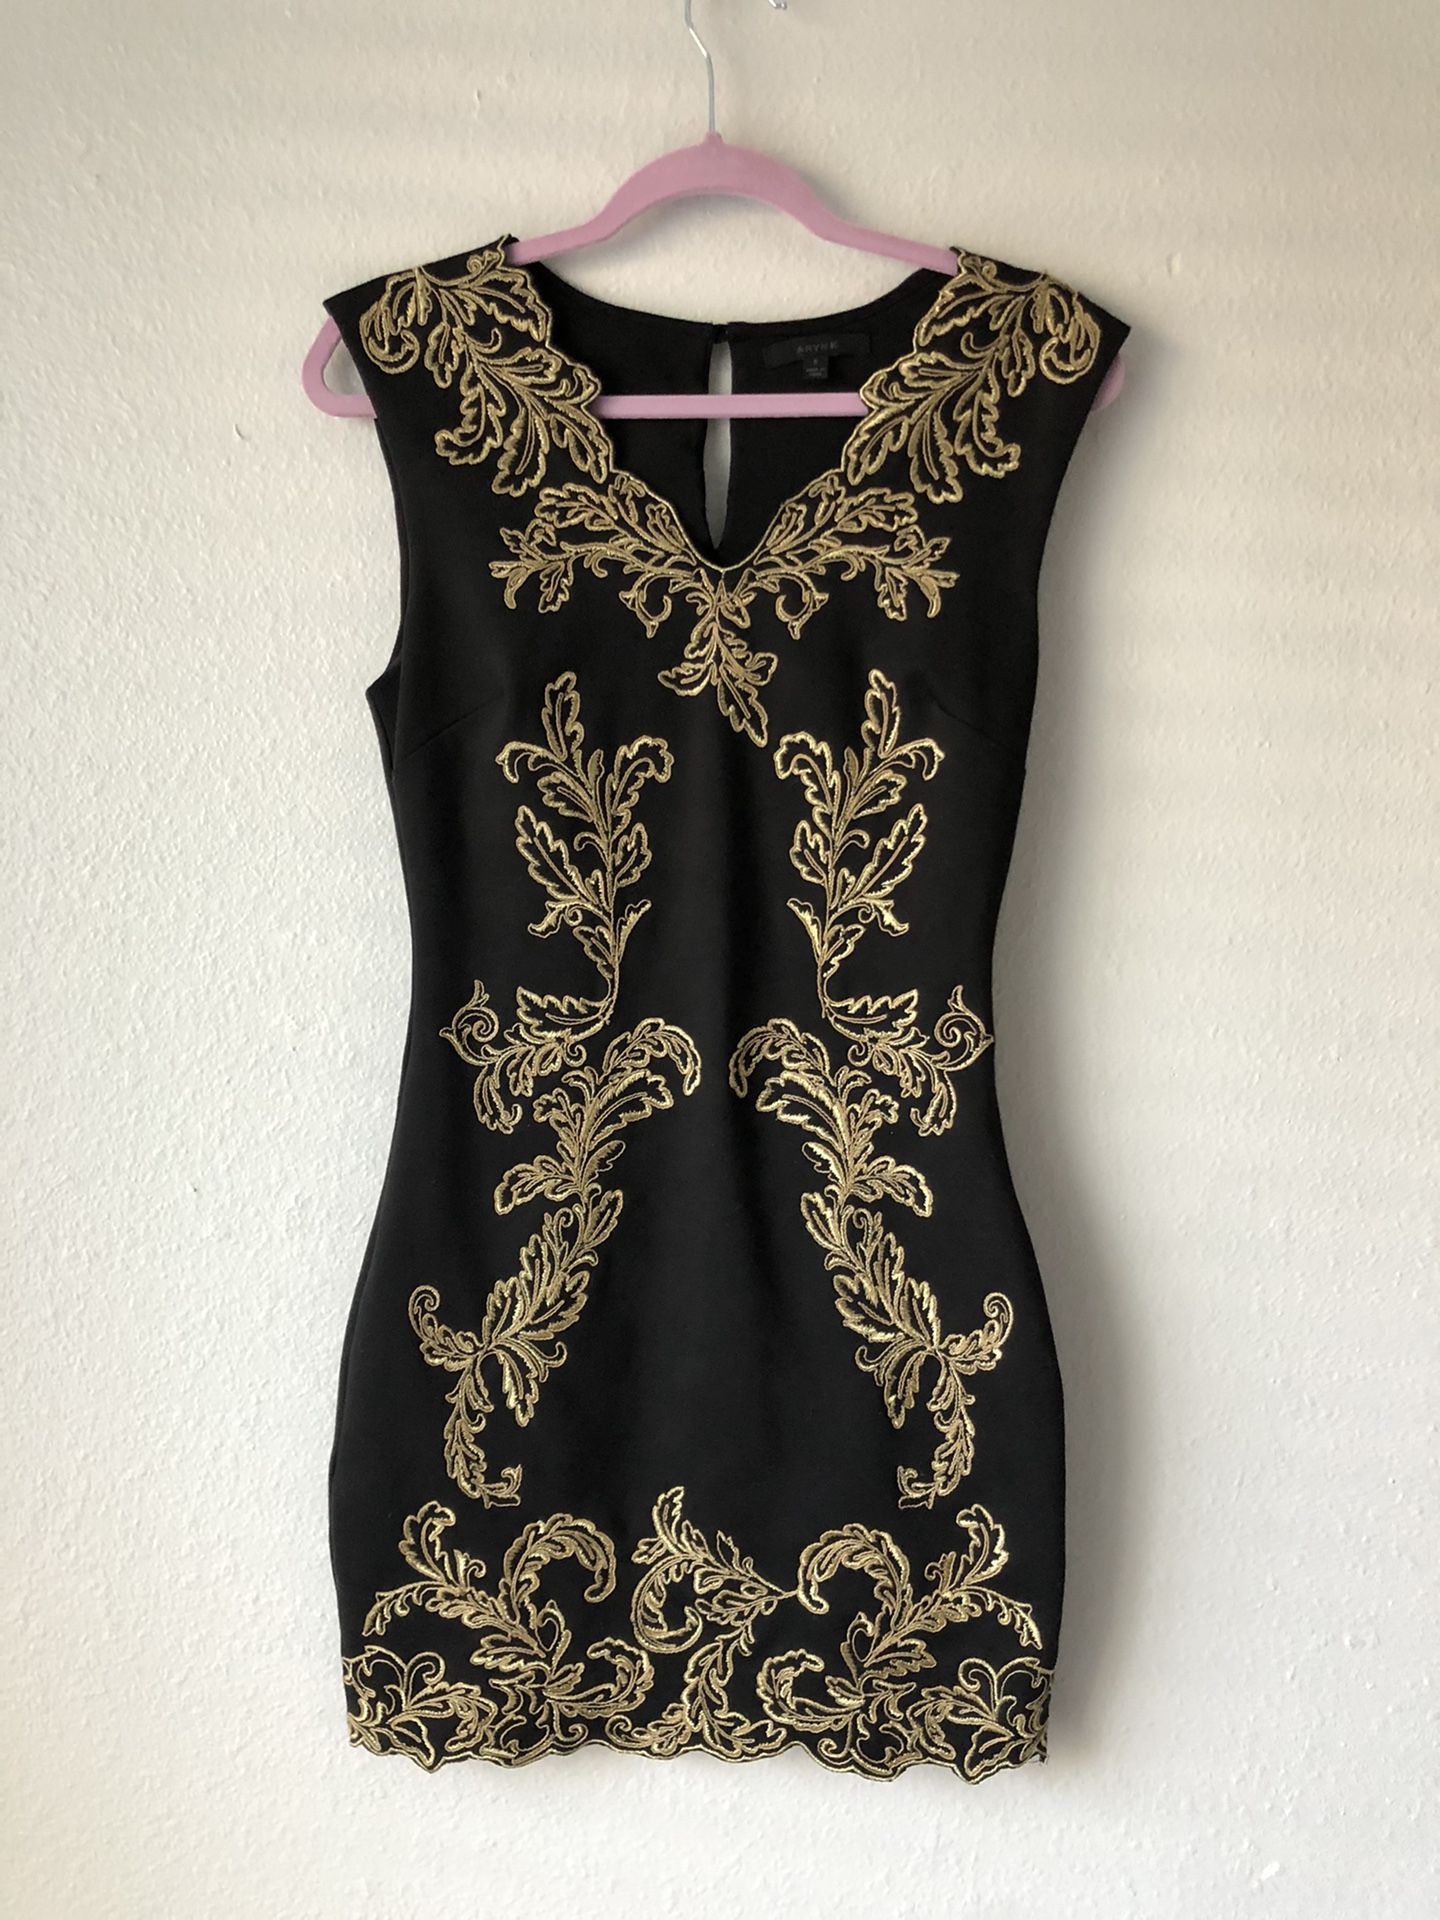 Aryn K Anthropologie Black Dress With Gold Embroidery Size Small